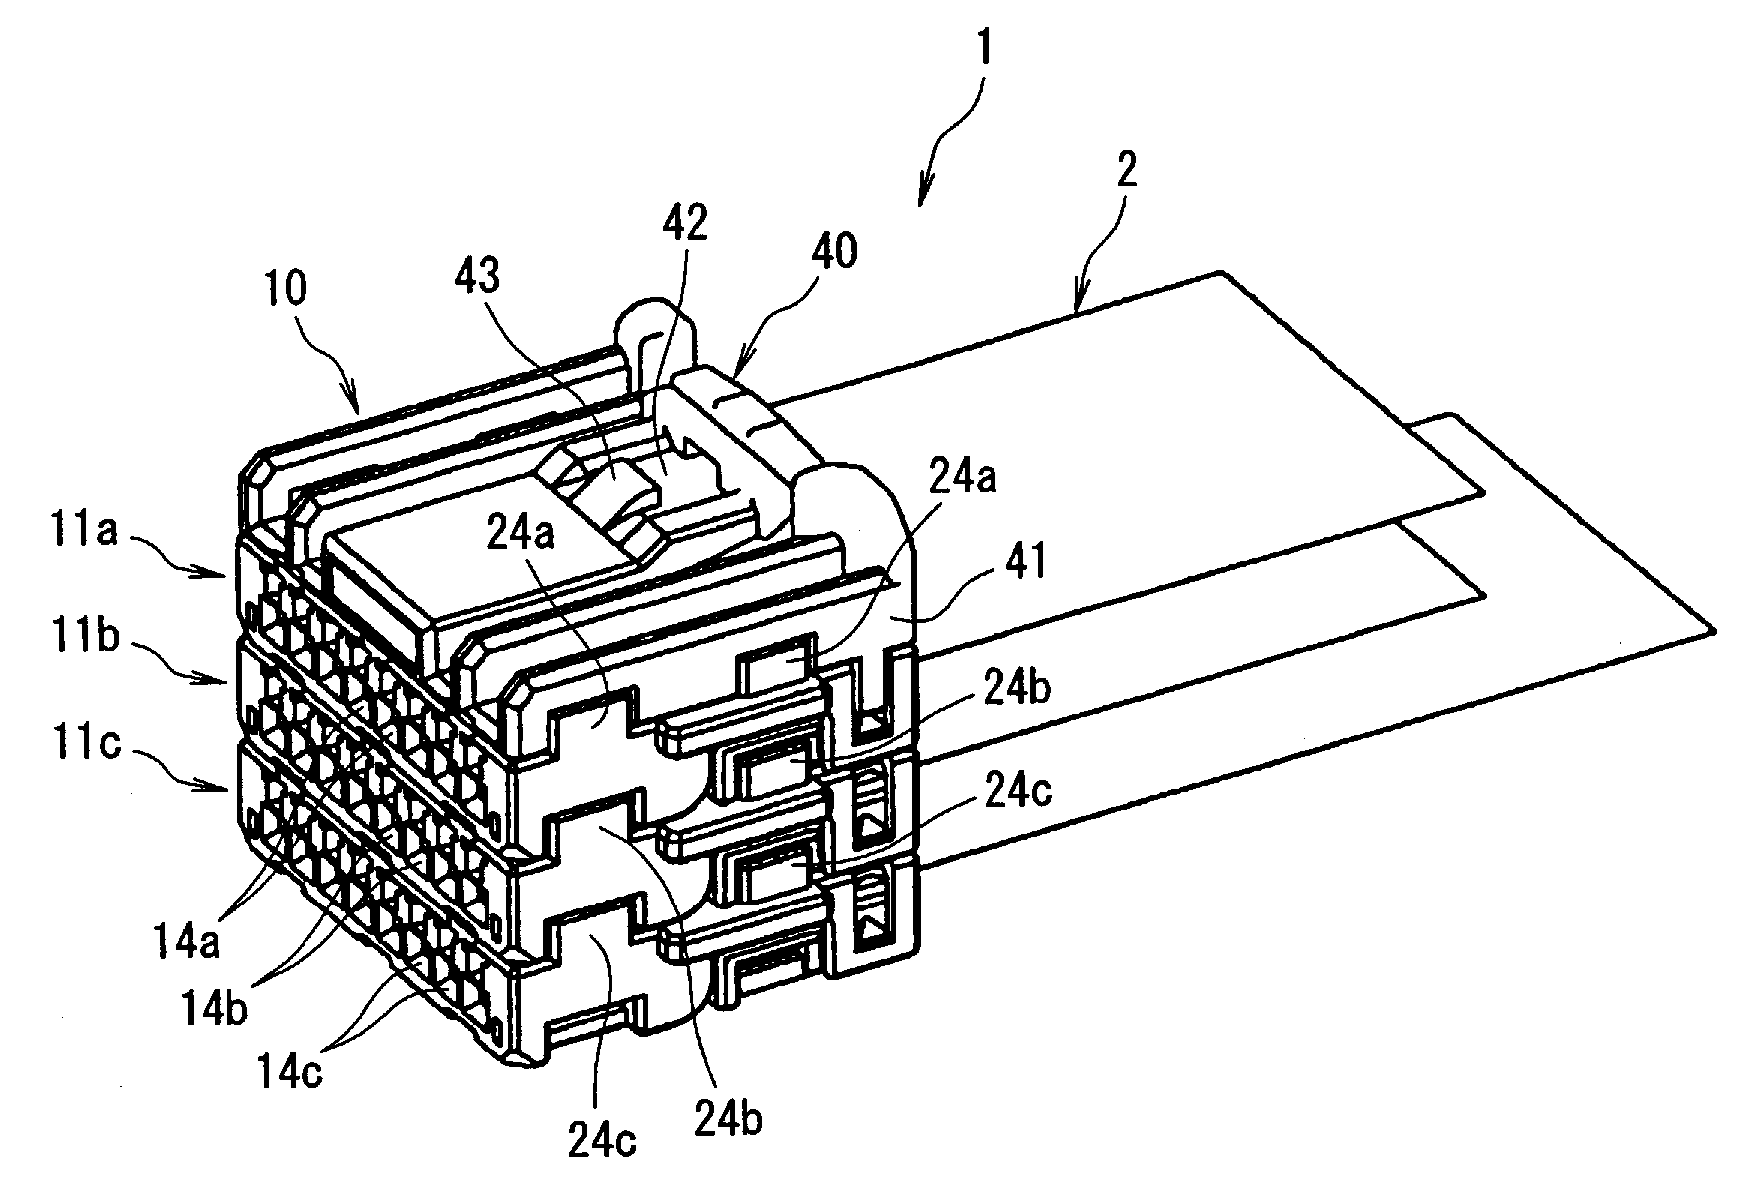 Electrical Connector, Wire Harness, and Method for Arranging Wire Harness